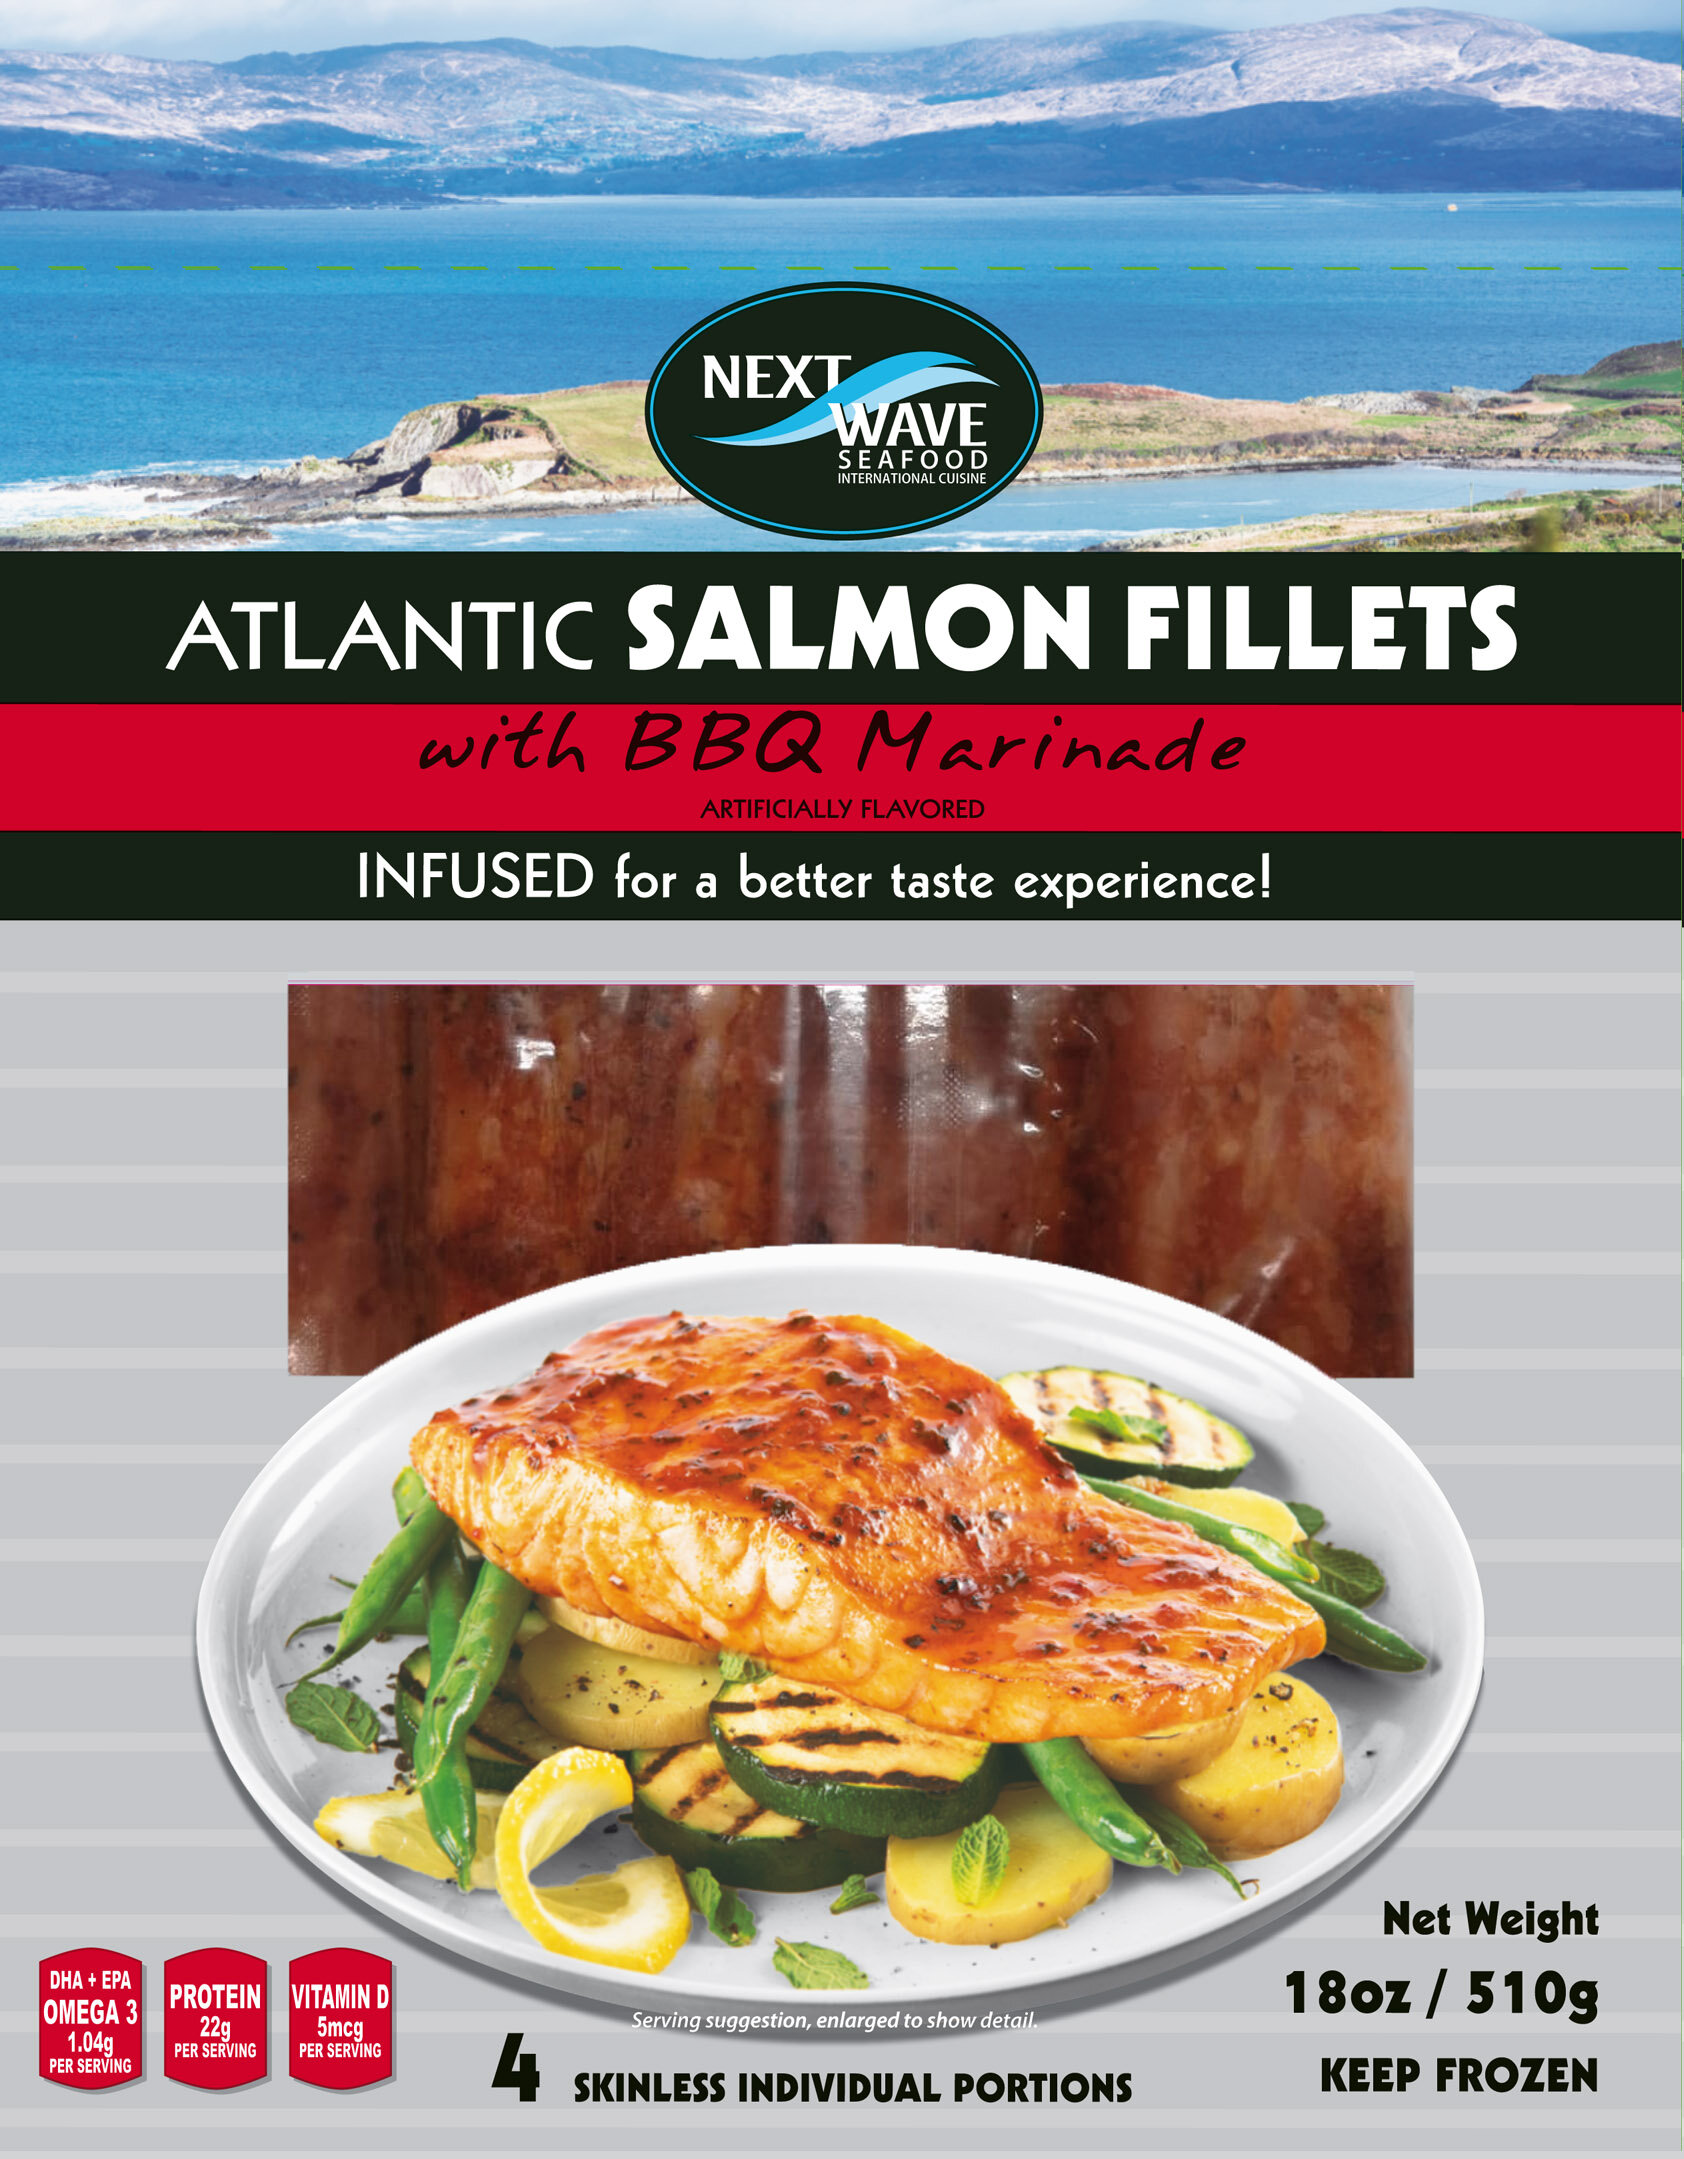 salmon fillets with BBQ marinade package